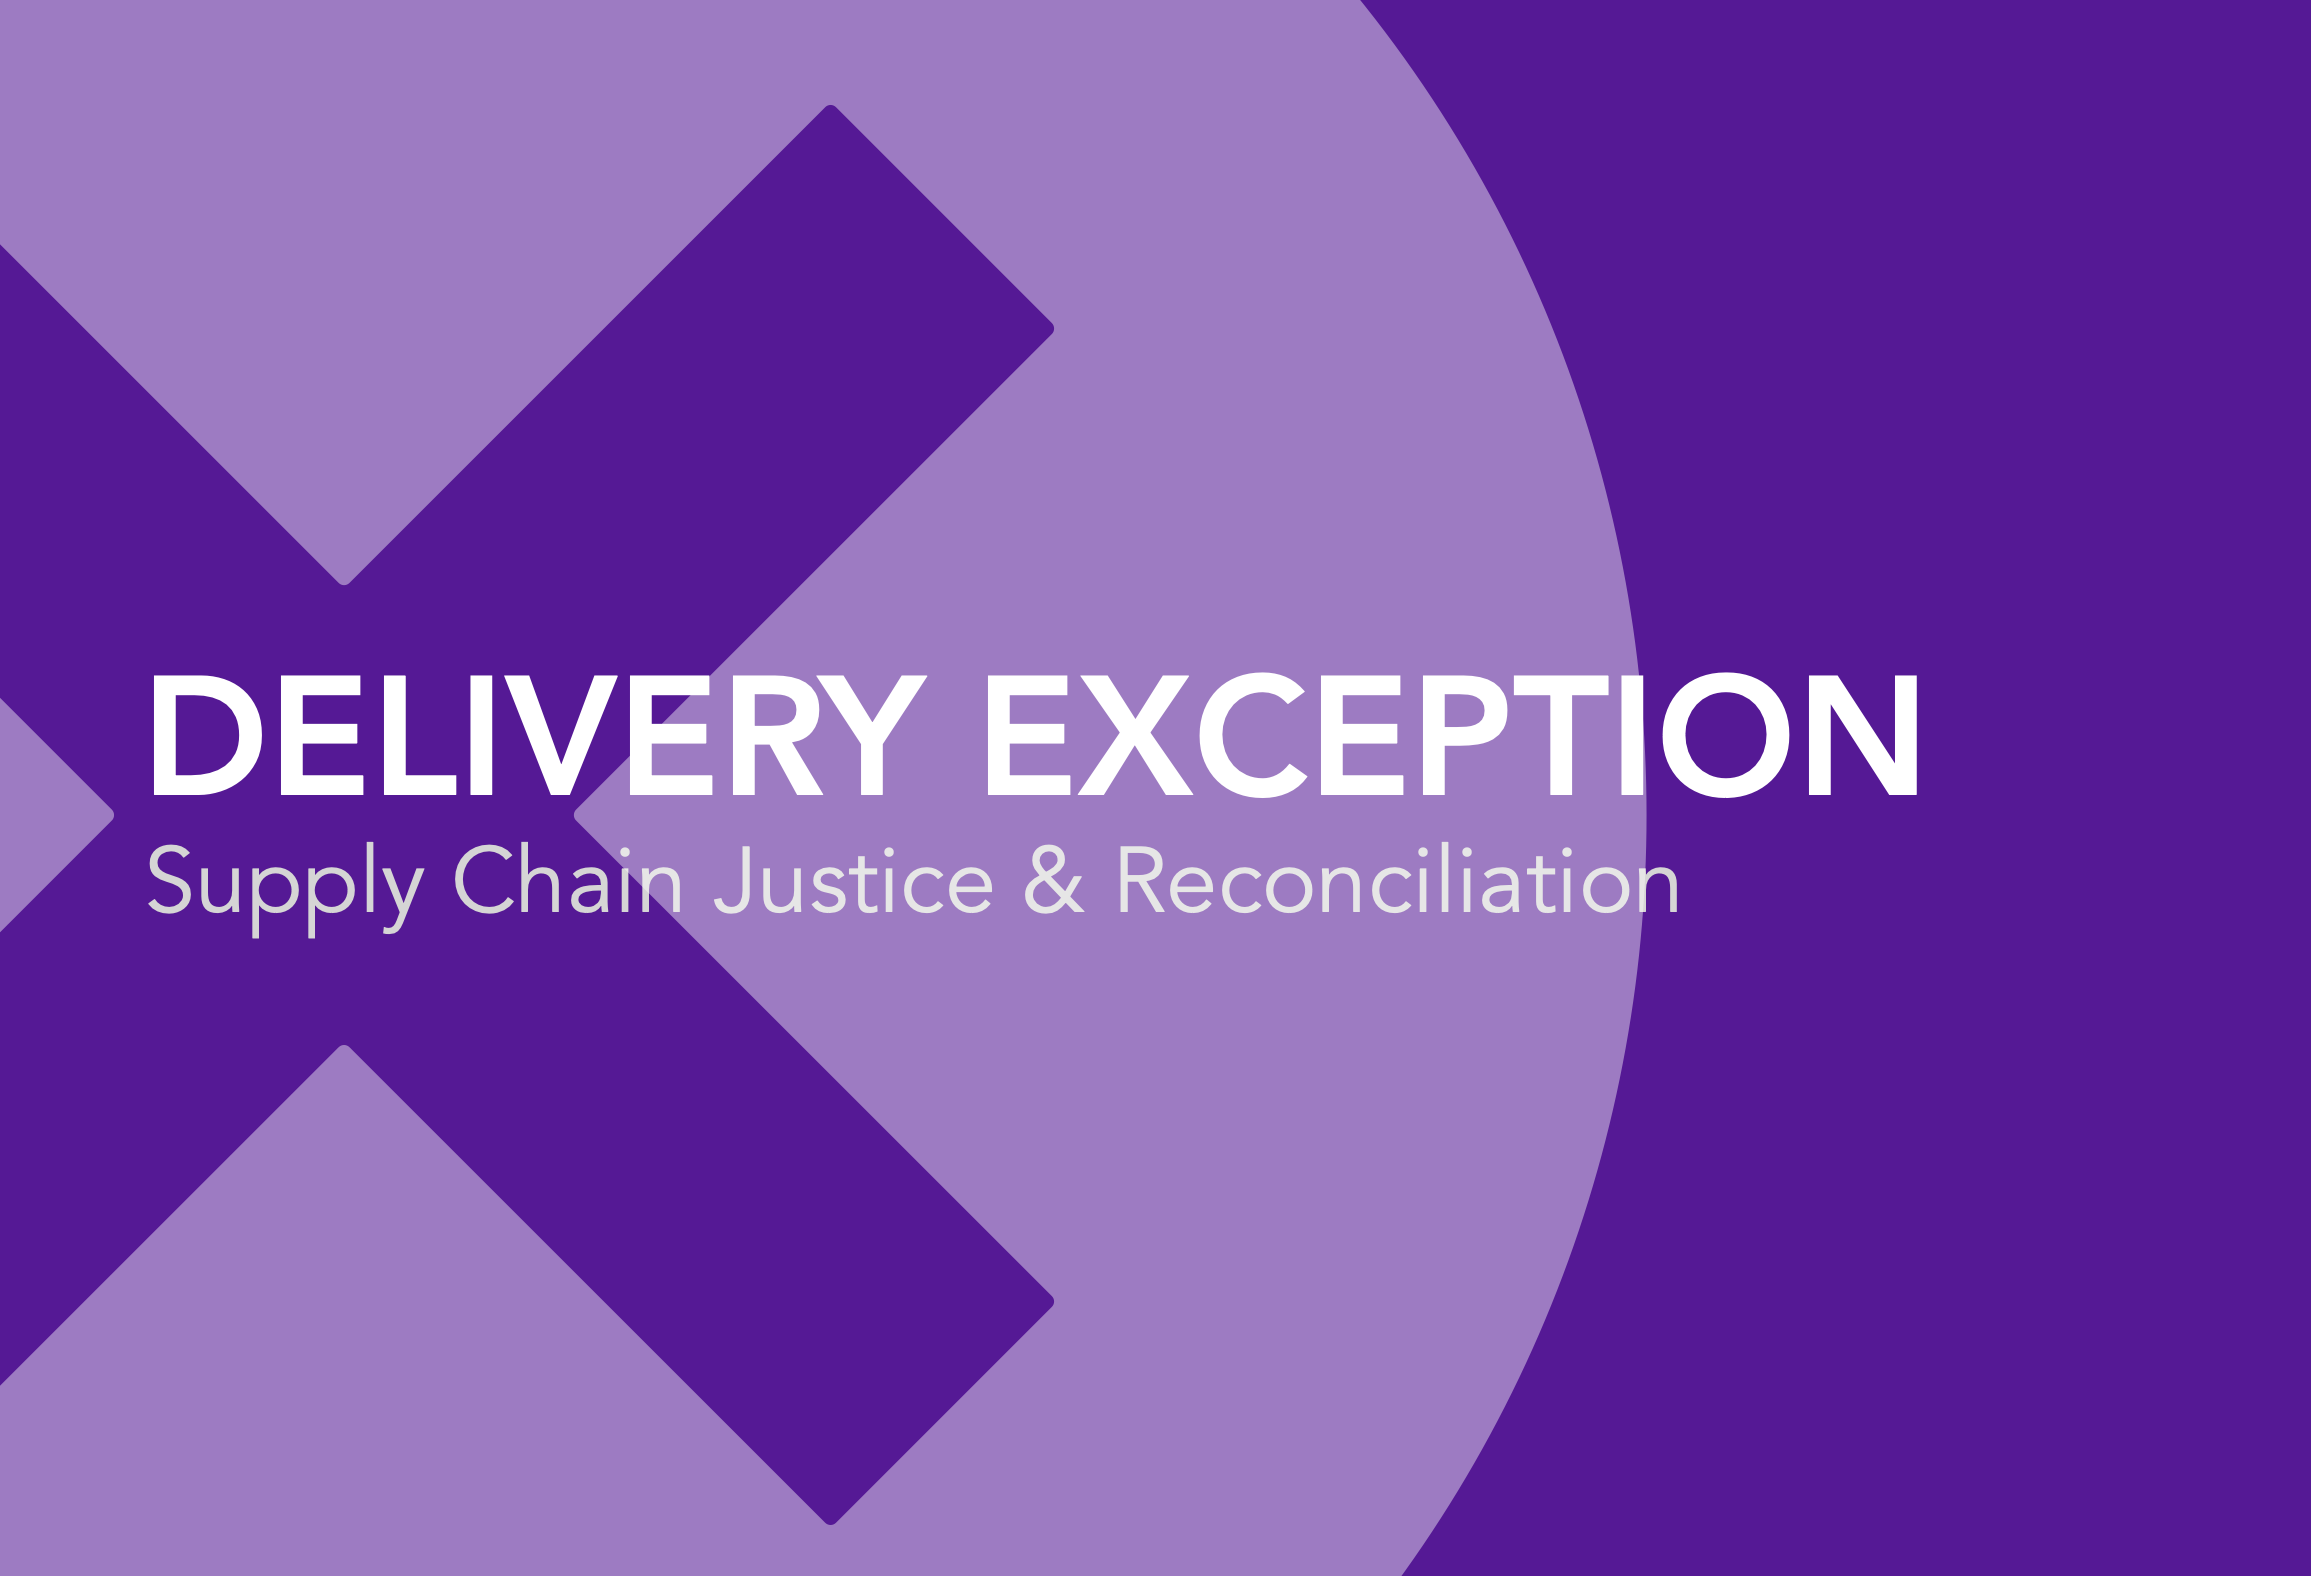 Delivery Exception: Supply Chain Justice & Reconciliation